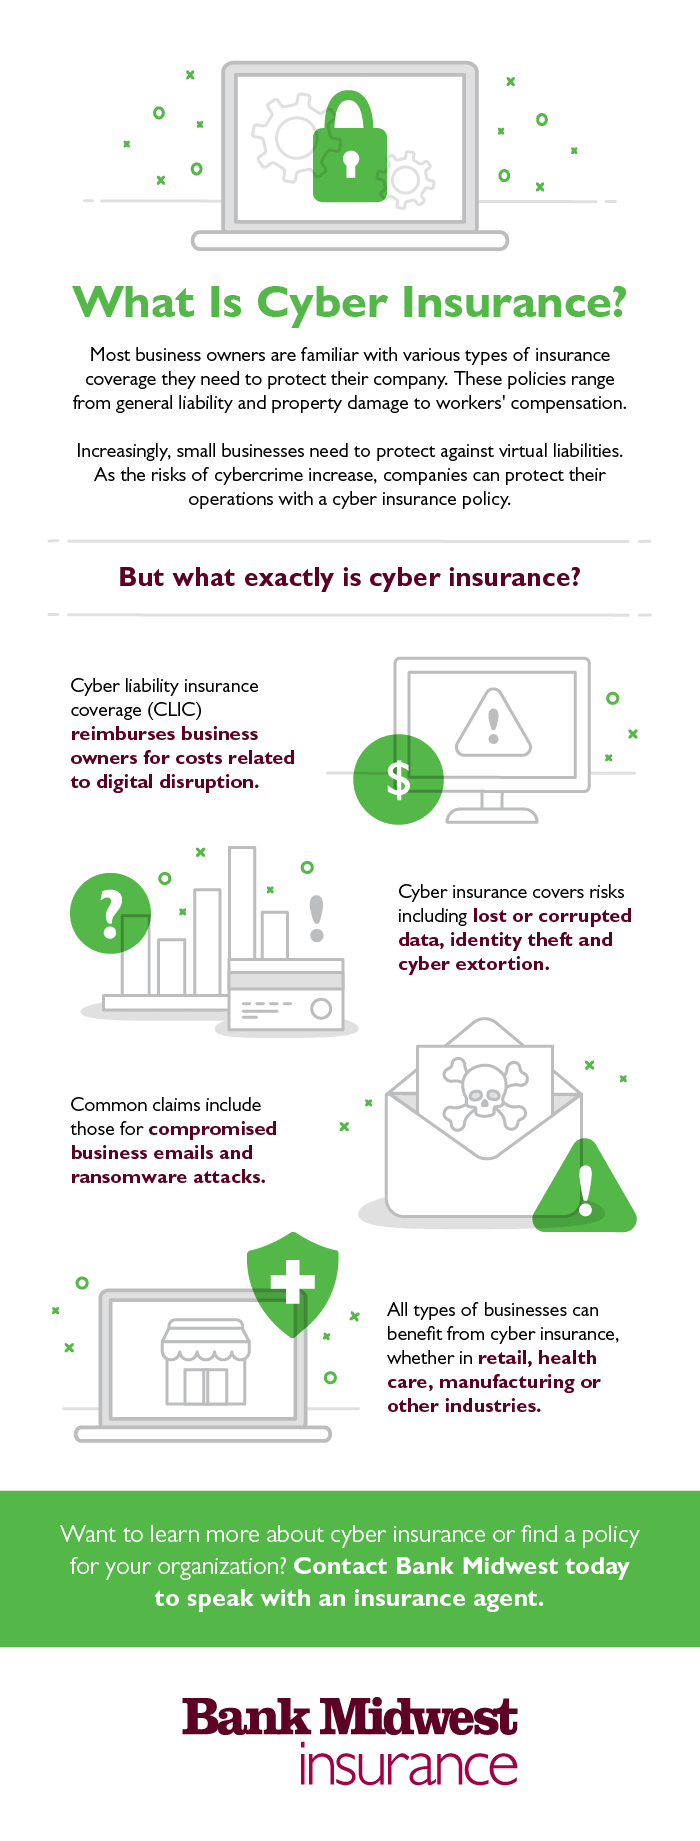 Cyber Insurance Infographic: What is cyber insurance? Cyber liability insurance coverage (CLIC) reimburses business owners for costs related to digital disruption. Covers risks including lost or corrupted data, identity theft and cyber extortion.  Common claims include those for compromised business emails and ransomware attacks.